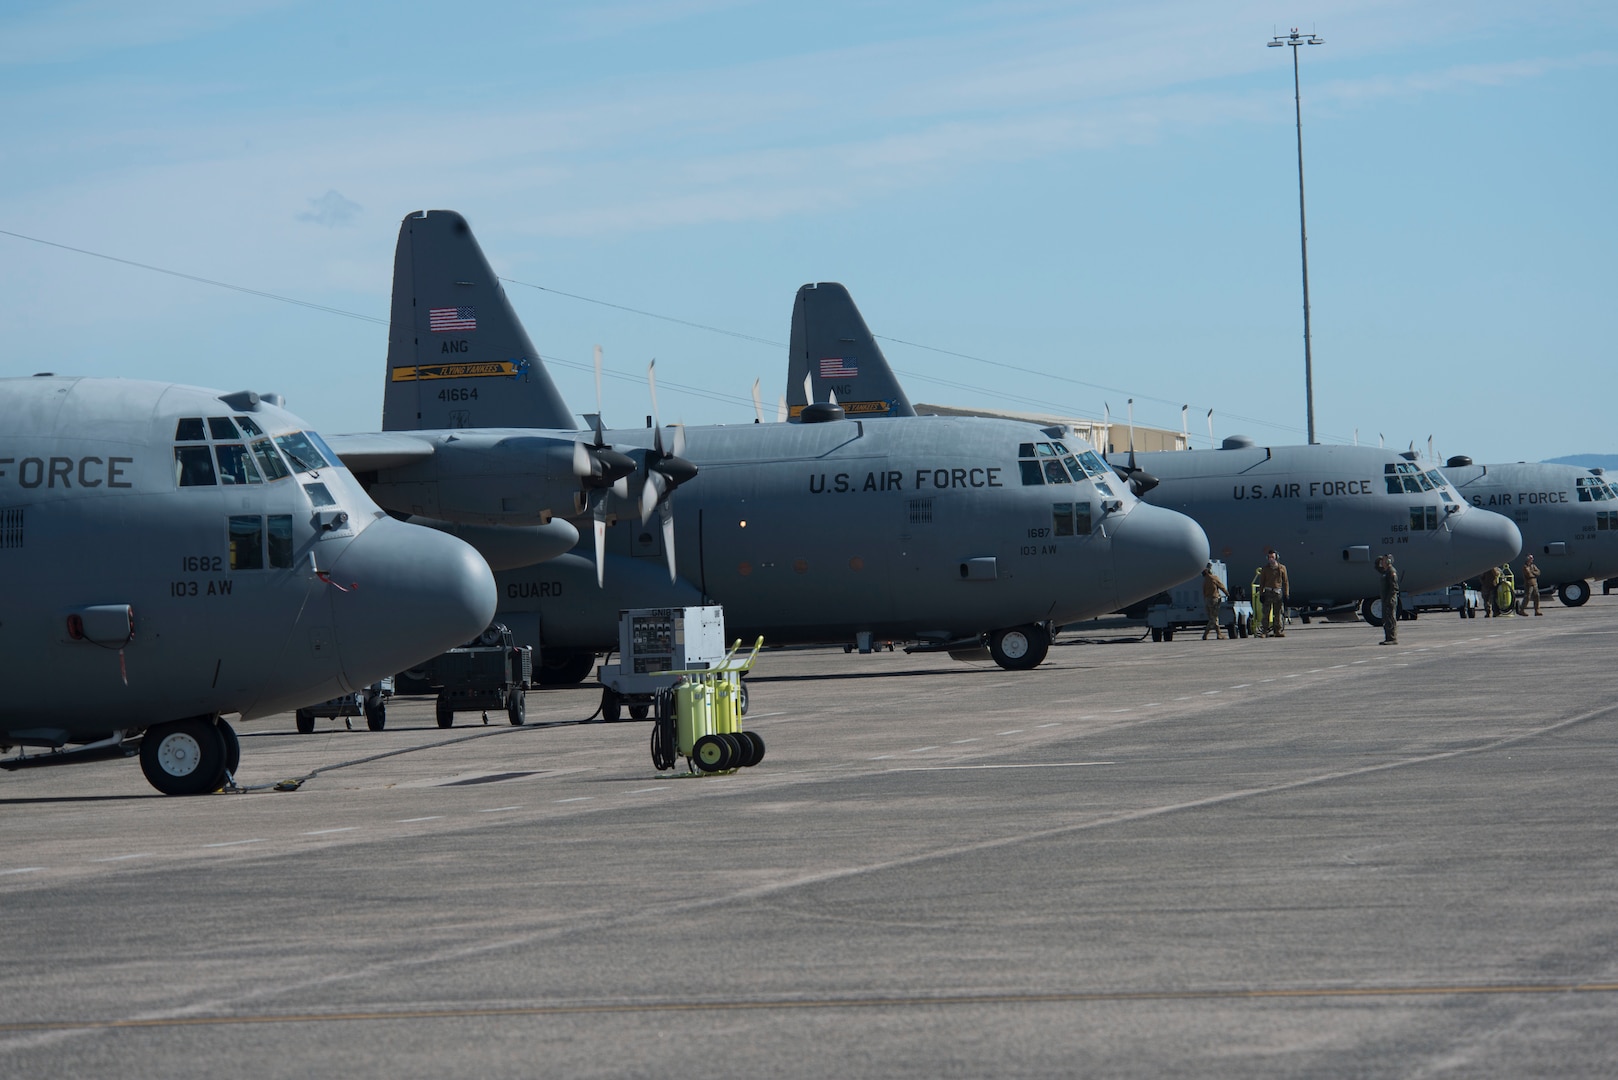 Five C-130H Hercules aircraft from the 103rd Airlift Wing prepare to depart Bradley Air National Guard Base in East Granby, Connecticut, Oct. 4, 2020. The mission, known as a “Max Fly,” challenges the unit to fly the maximum amount of aircraft in its fleet in a single mission in a display of the unit’s readiness and tactical airlift capabilities.